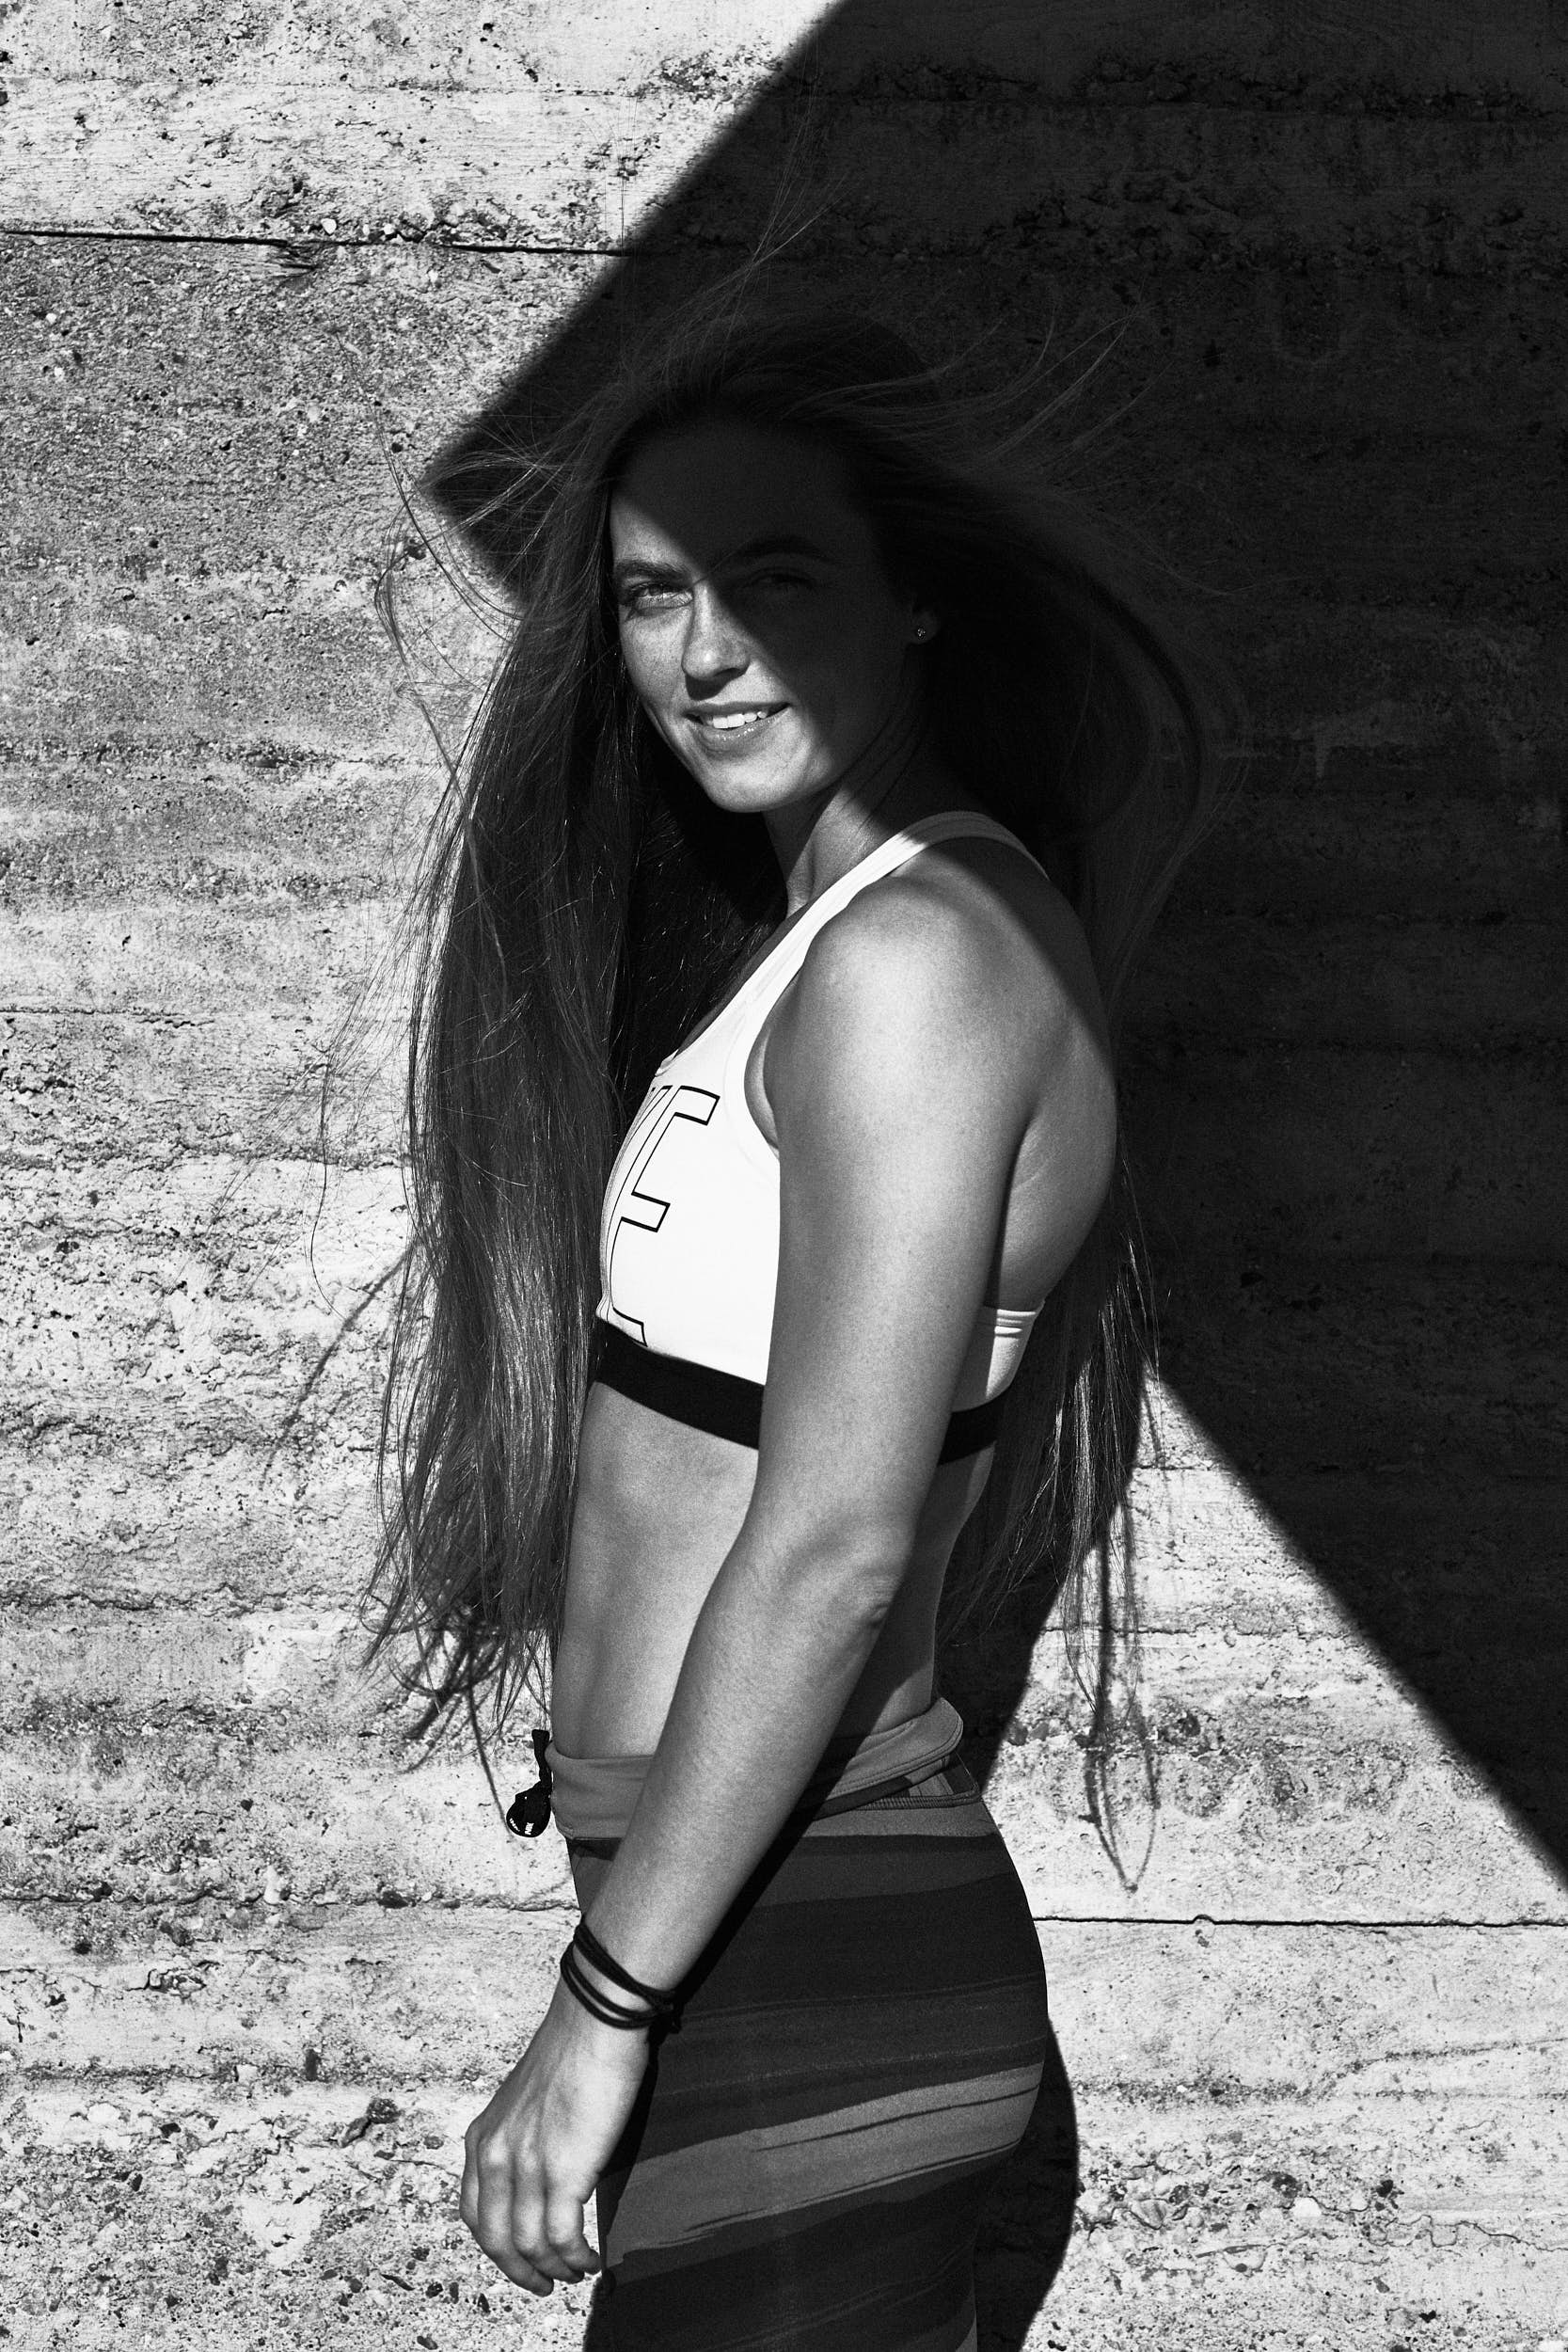 Black and white portrait of a female runner in front of a concrete wall with strong shadows.